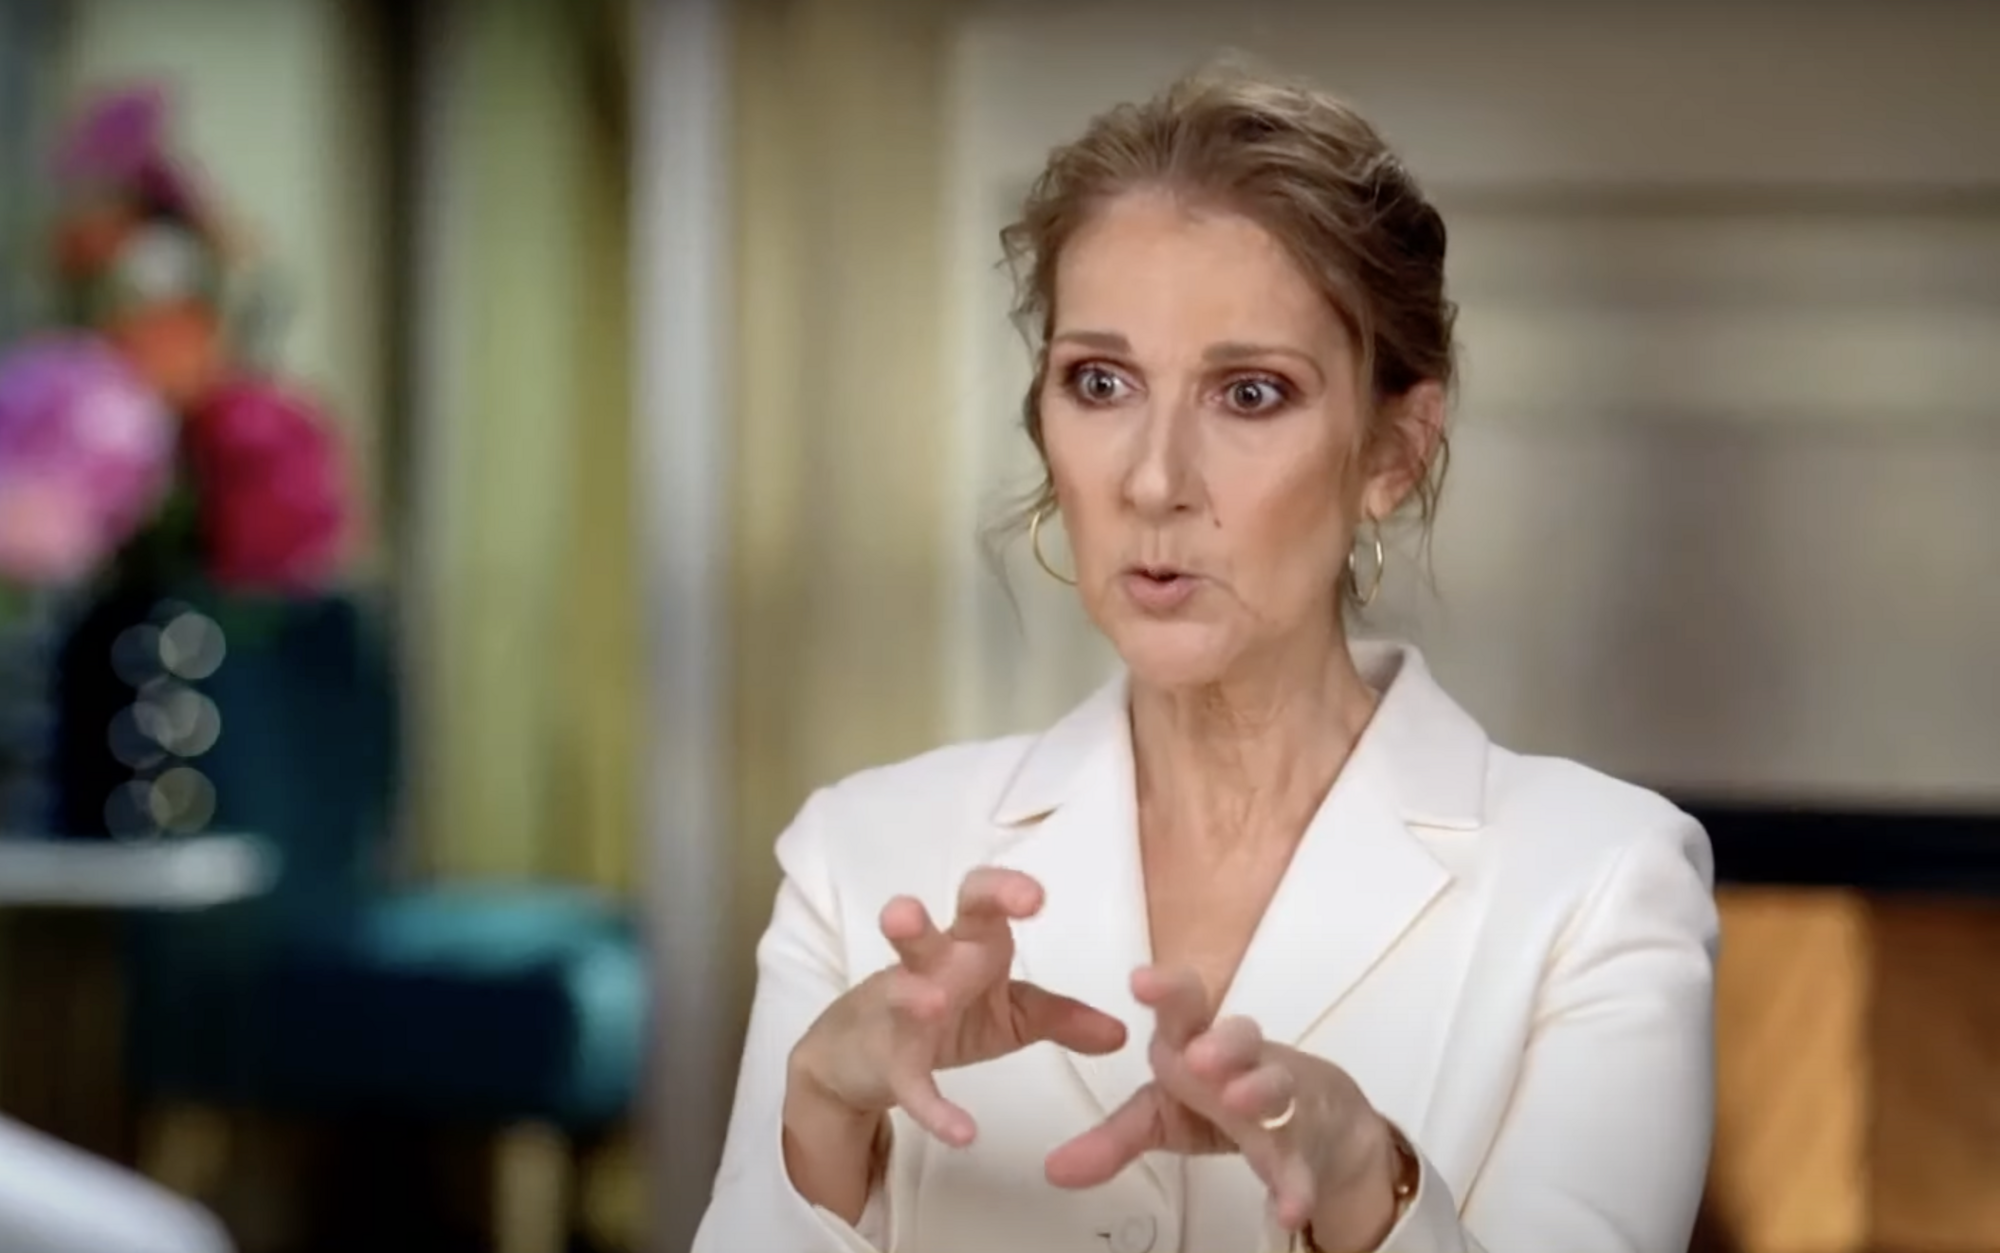 Incurably ill Celine Dion has changed beyond recognition: how the ''stiff person syndrome'' affected the singer